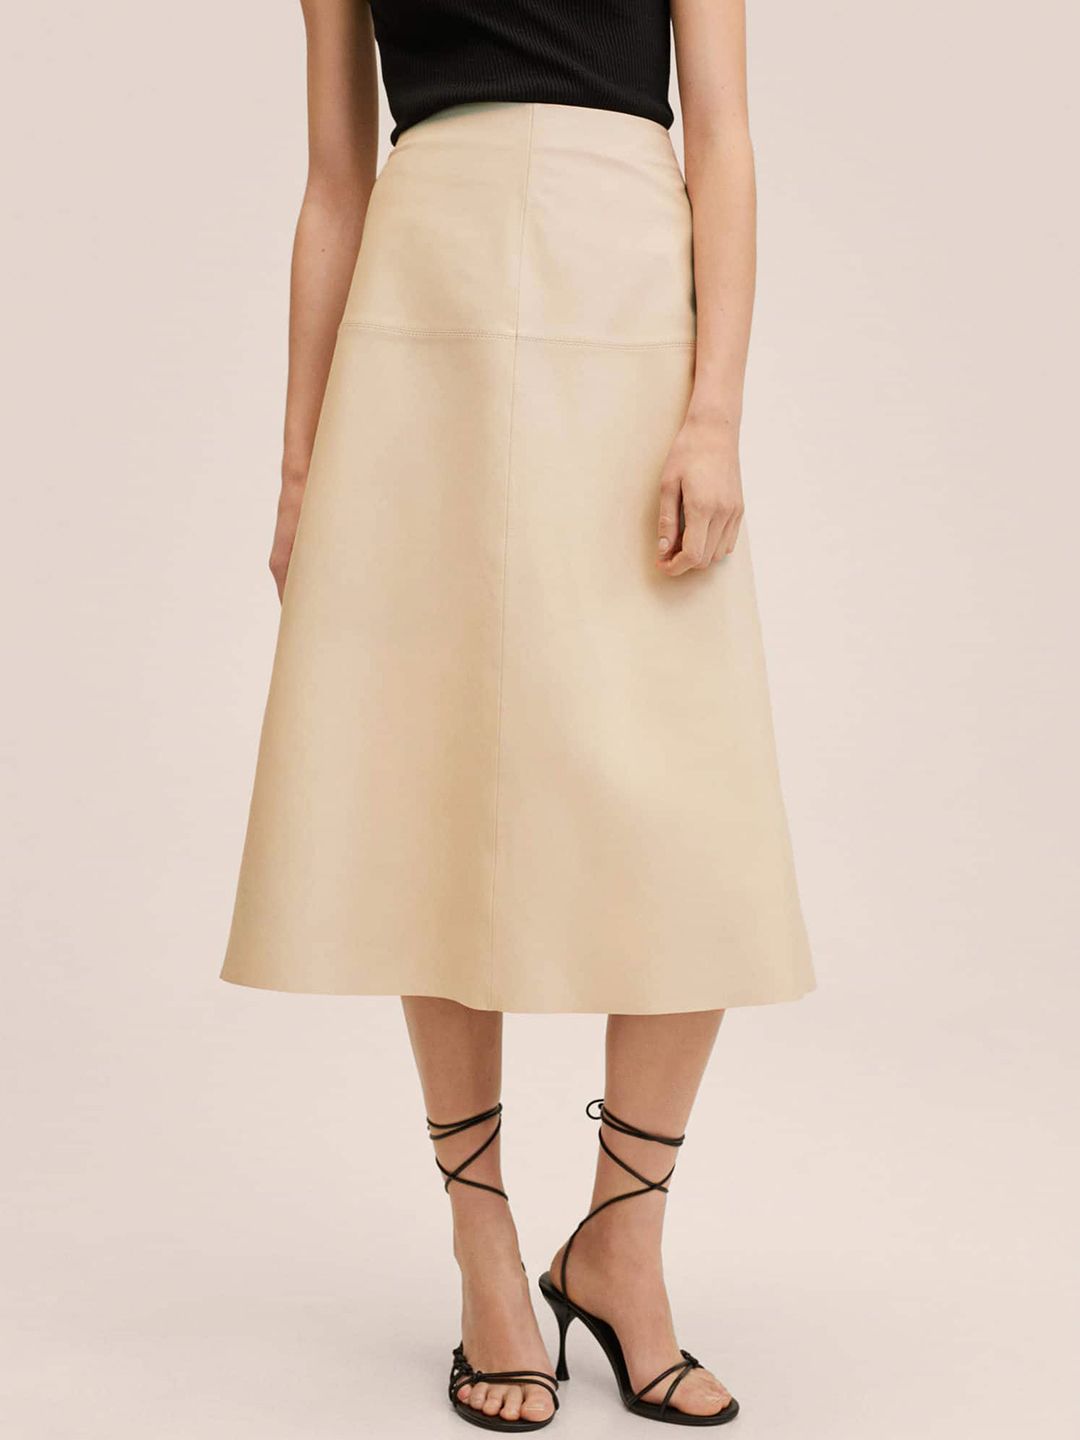 MANGO Off-White Leather Solid Casual A-Line Midi Skirt Price in India